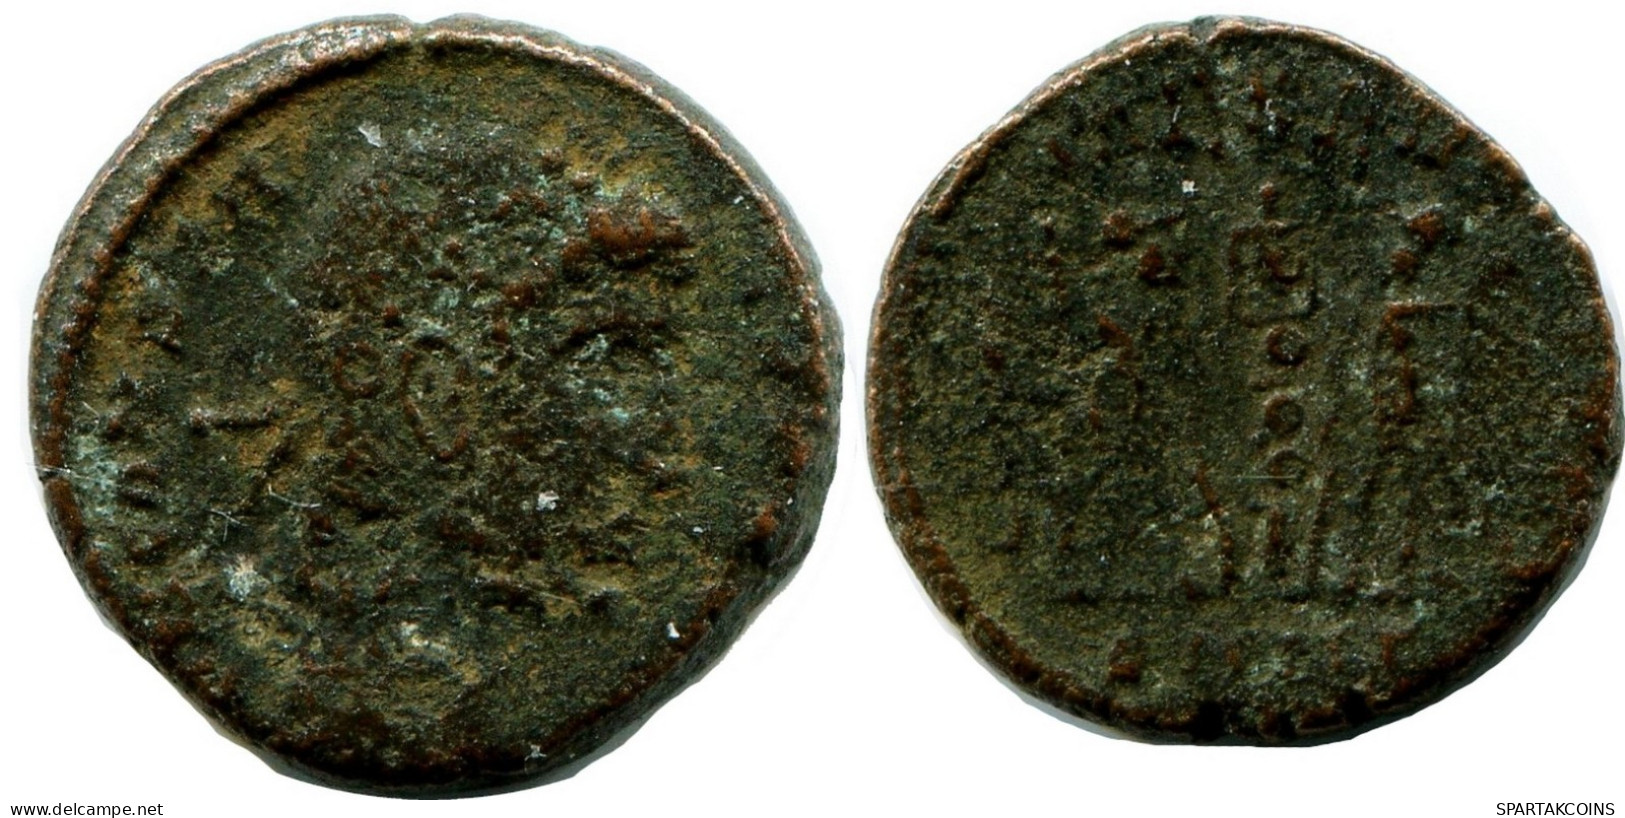 CONSTANS MINTED IN HERACLEA FROM THE ROYAL ONTARIO MUSEUM #ANC11562.14.U.A - The Christian Empire (307 AD To 363 AD)